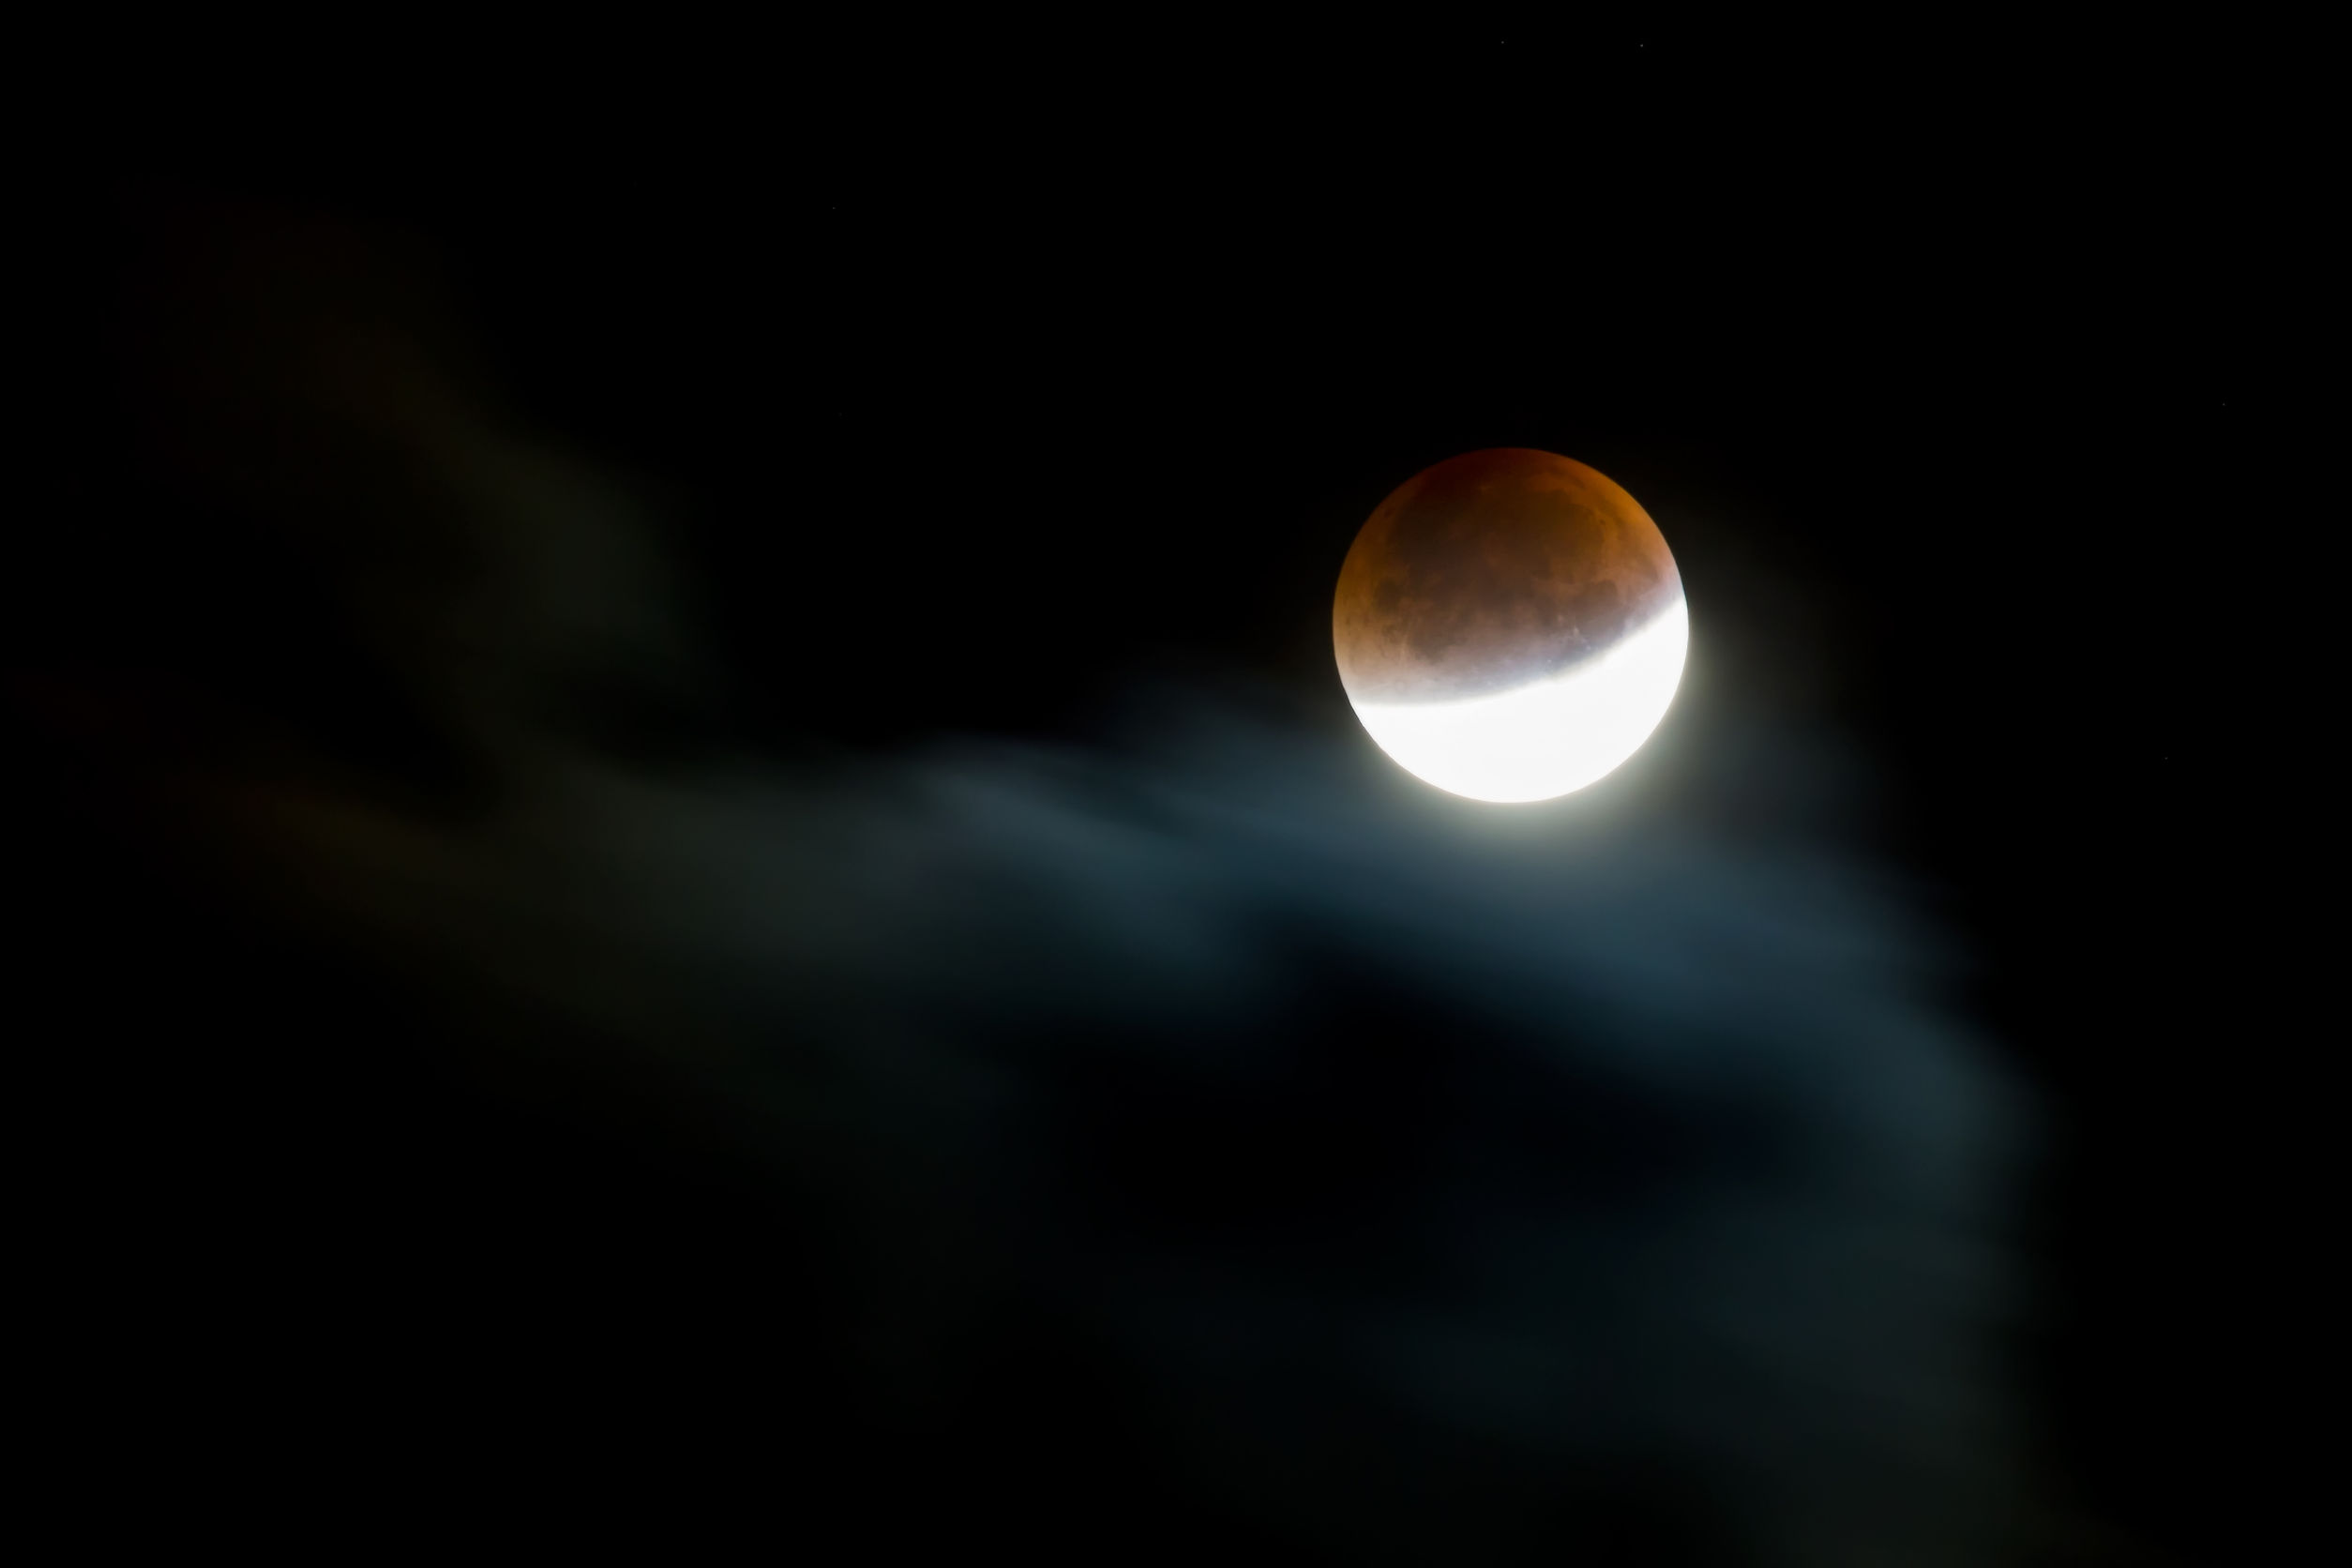 46293452 - supermoon and blood moon eclipse coincide on 28th september 2015.